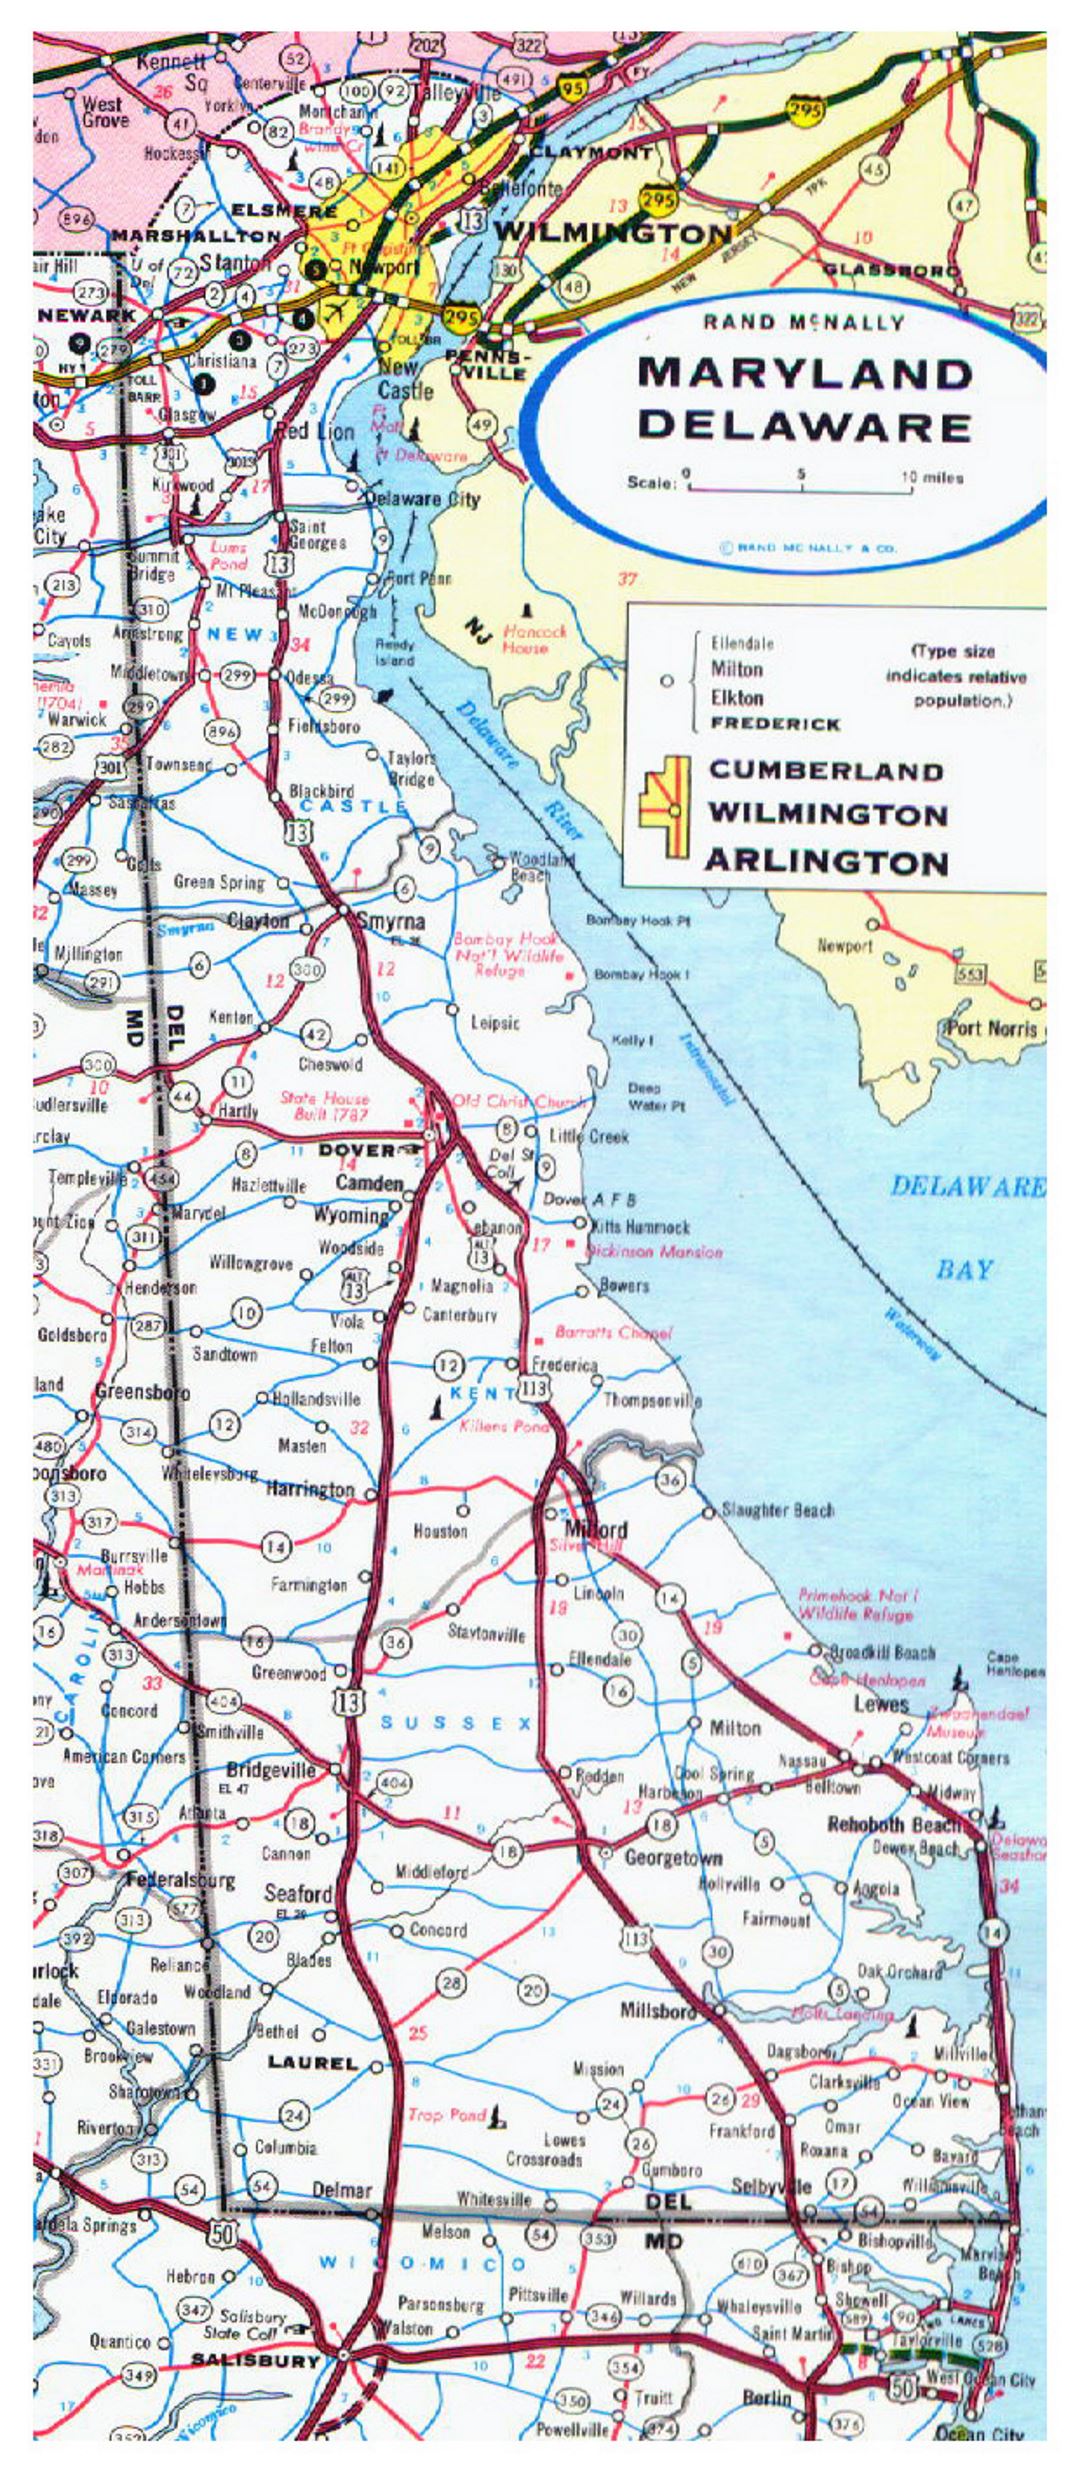 Roads and highways map of Delaware state - 1973